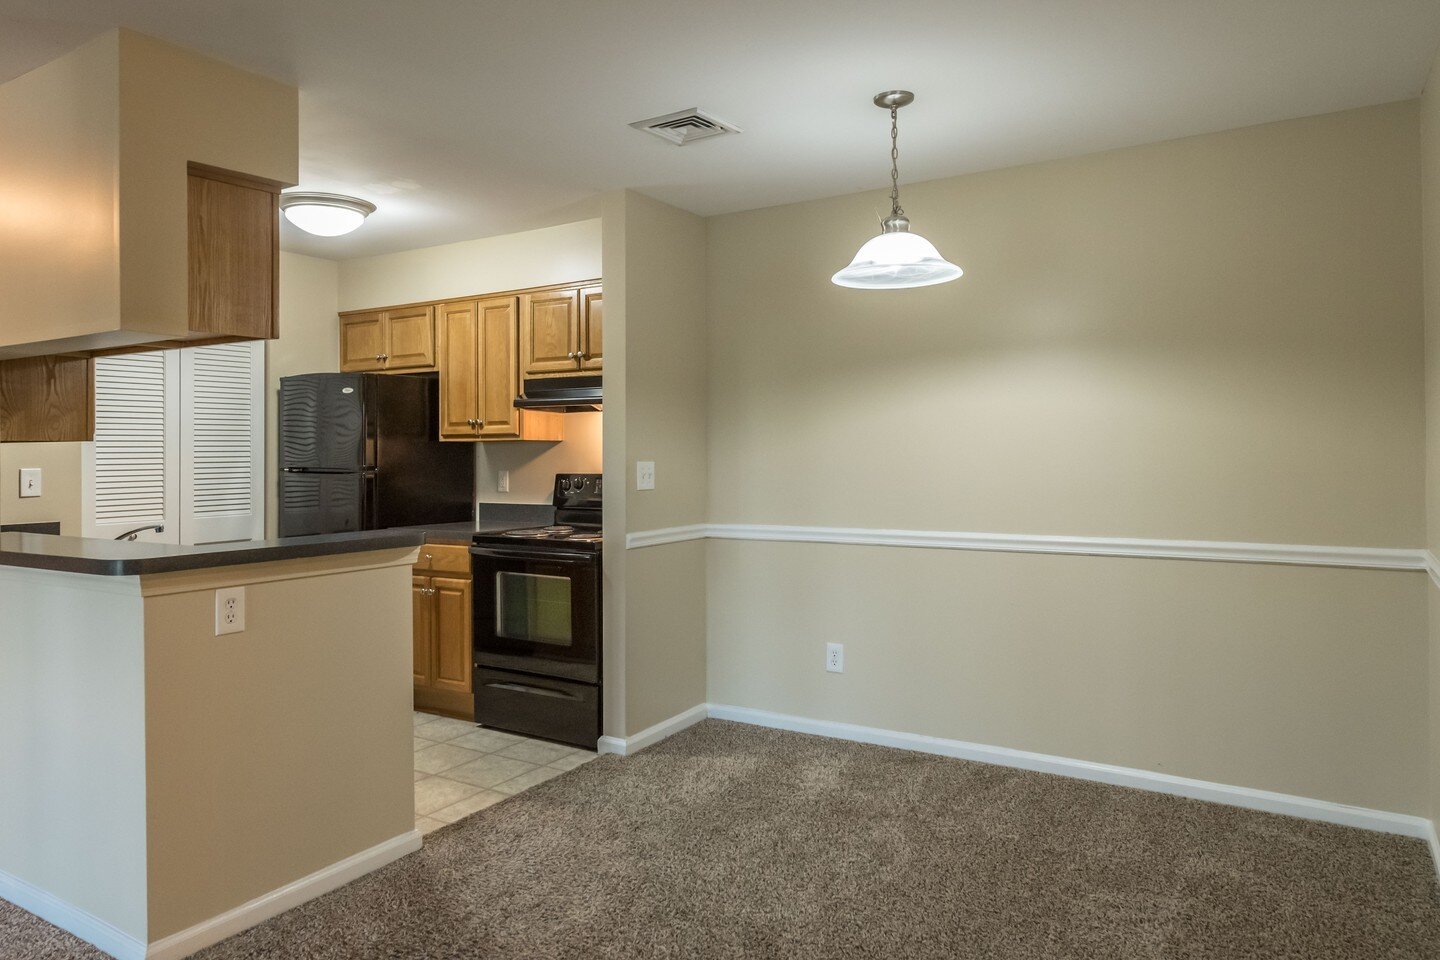 🏡 Explore our spacious 1-bedroom, 1-bathroom apartment home gems with a private balcony, in-unit washer and dryer and more! Your dream home awaits! ✨ 

Visit https://northwoodsct.com/ to schedule a tour today!

#nowleasing #availablenow #availabilit